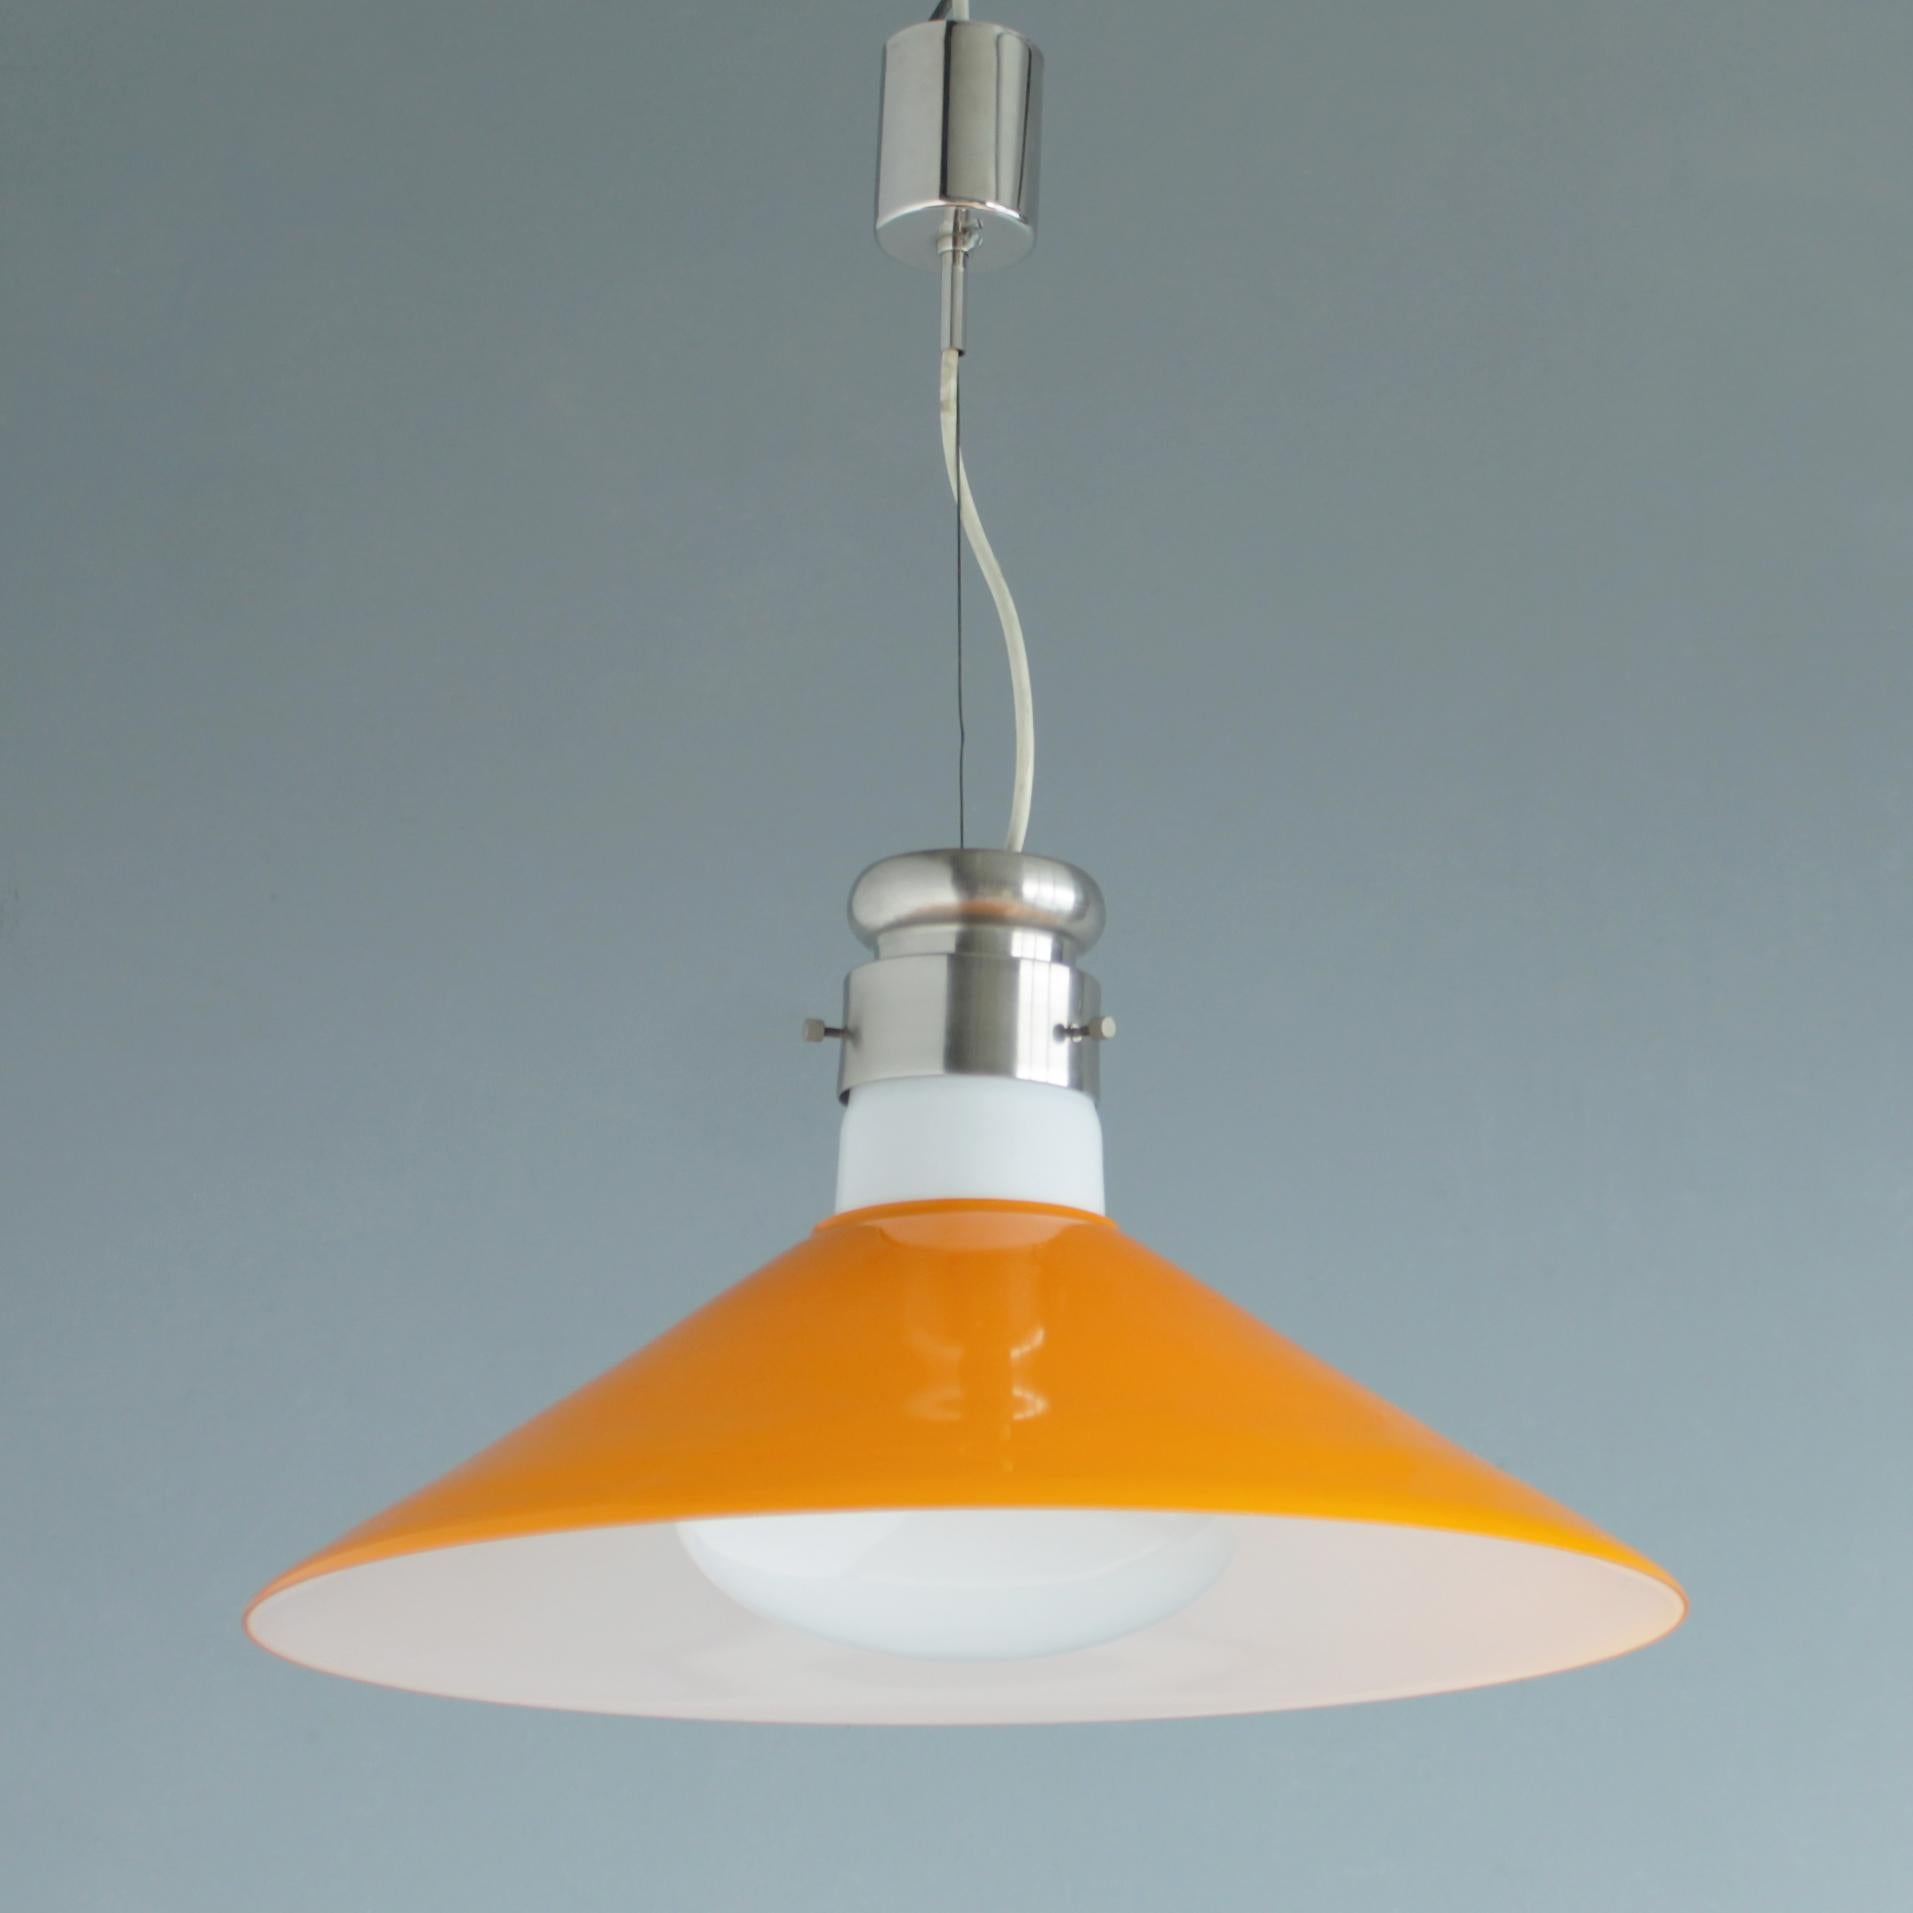 Large cased Murano glass pendant by the Italian designer Alessandro Pianon for Vistosi, Italy, 1960.
Dimensions: height of the lamp: 11.0 in. (28 cm), diameter orange glass: 19.7 inches (50 cm). From ceiling till drop: 35.0 inches (89 cm).
The